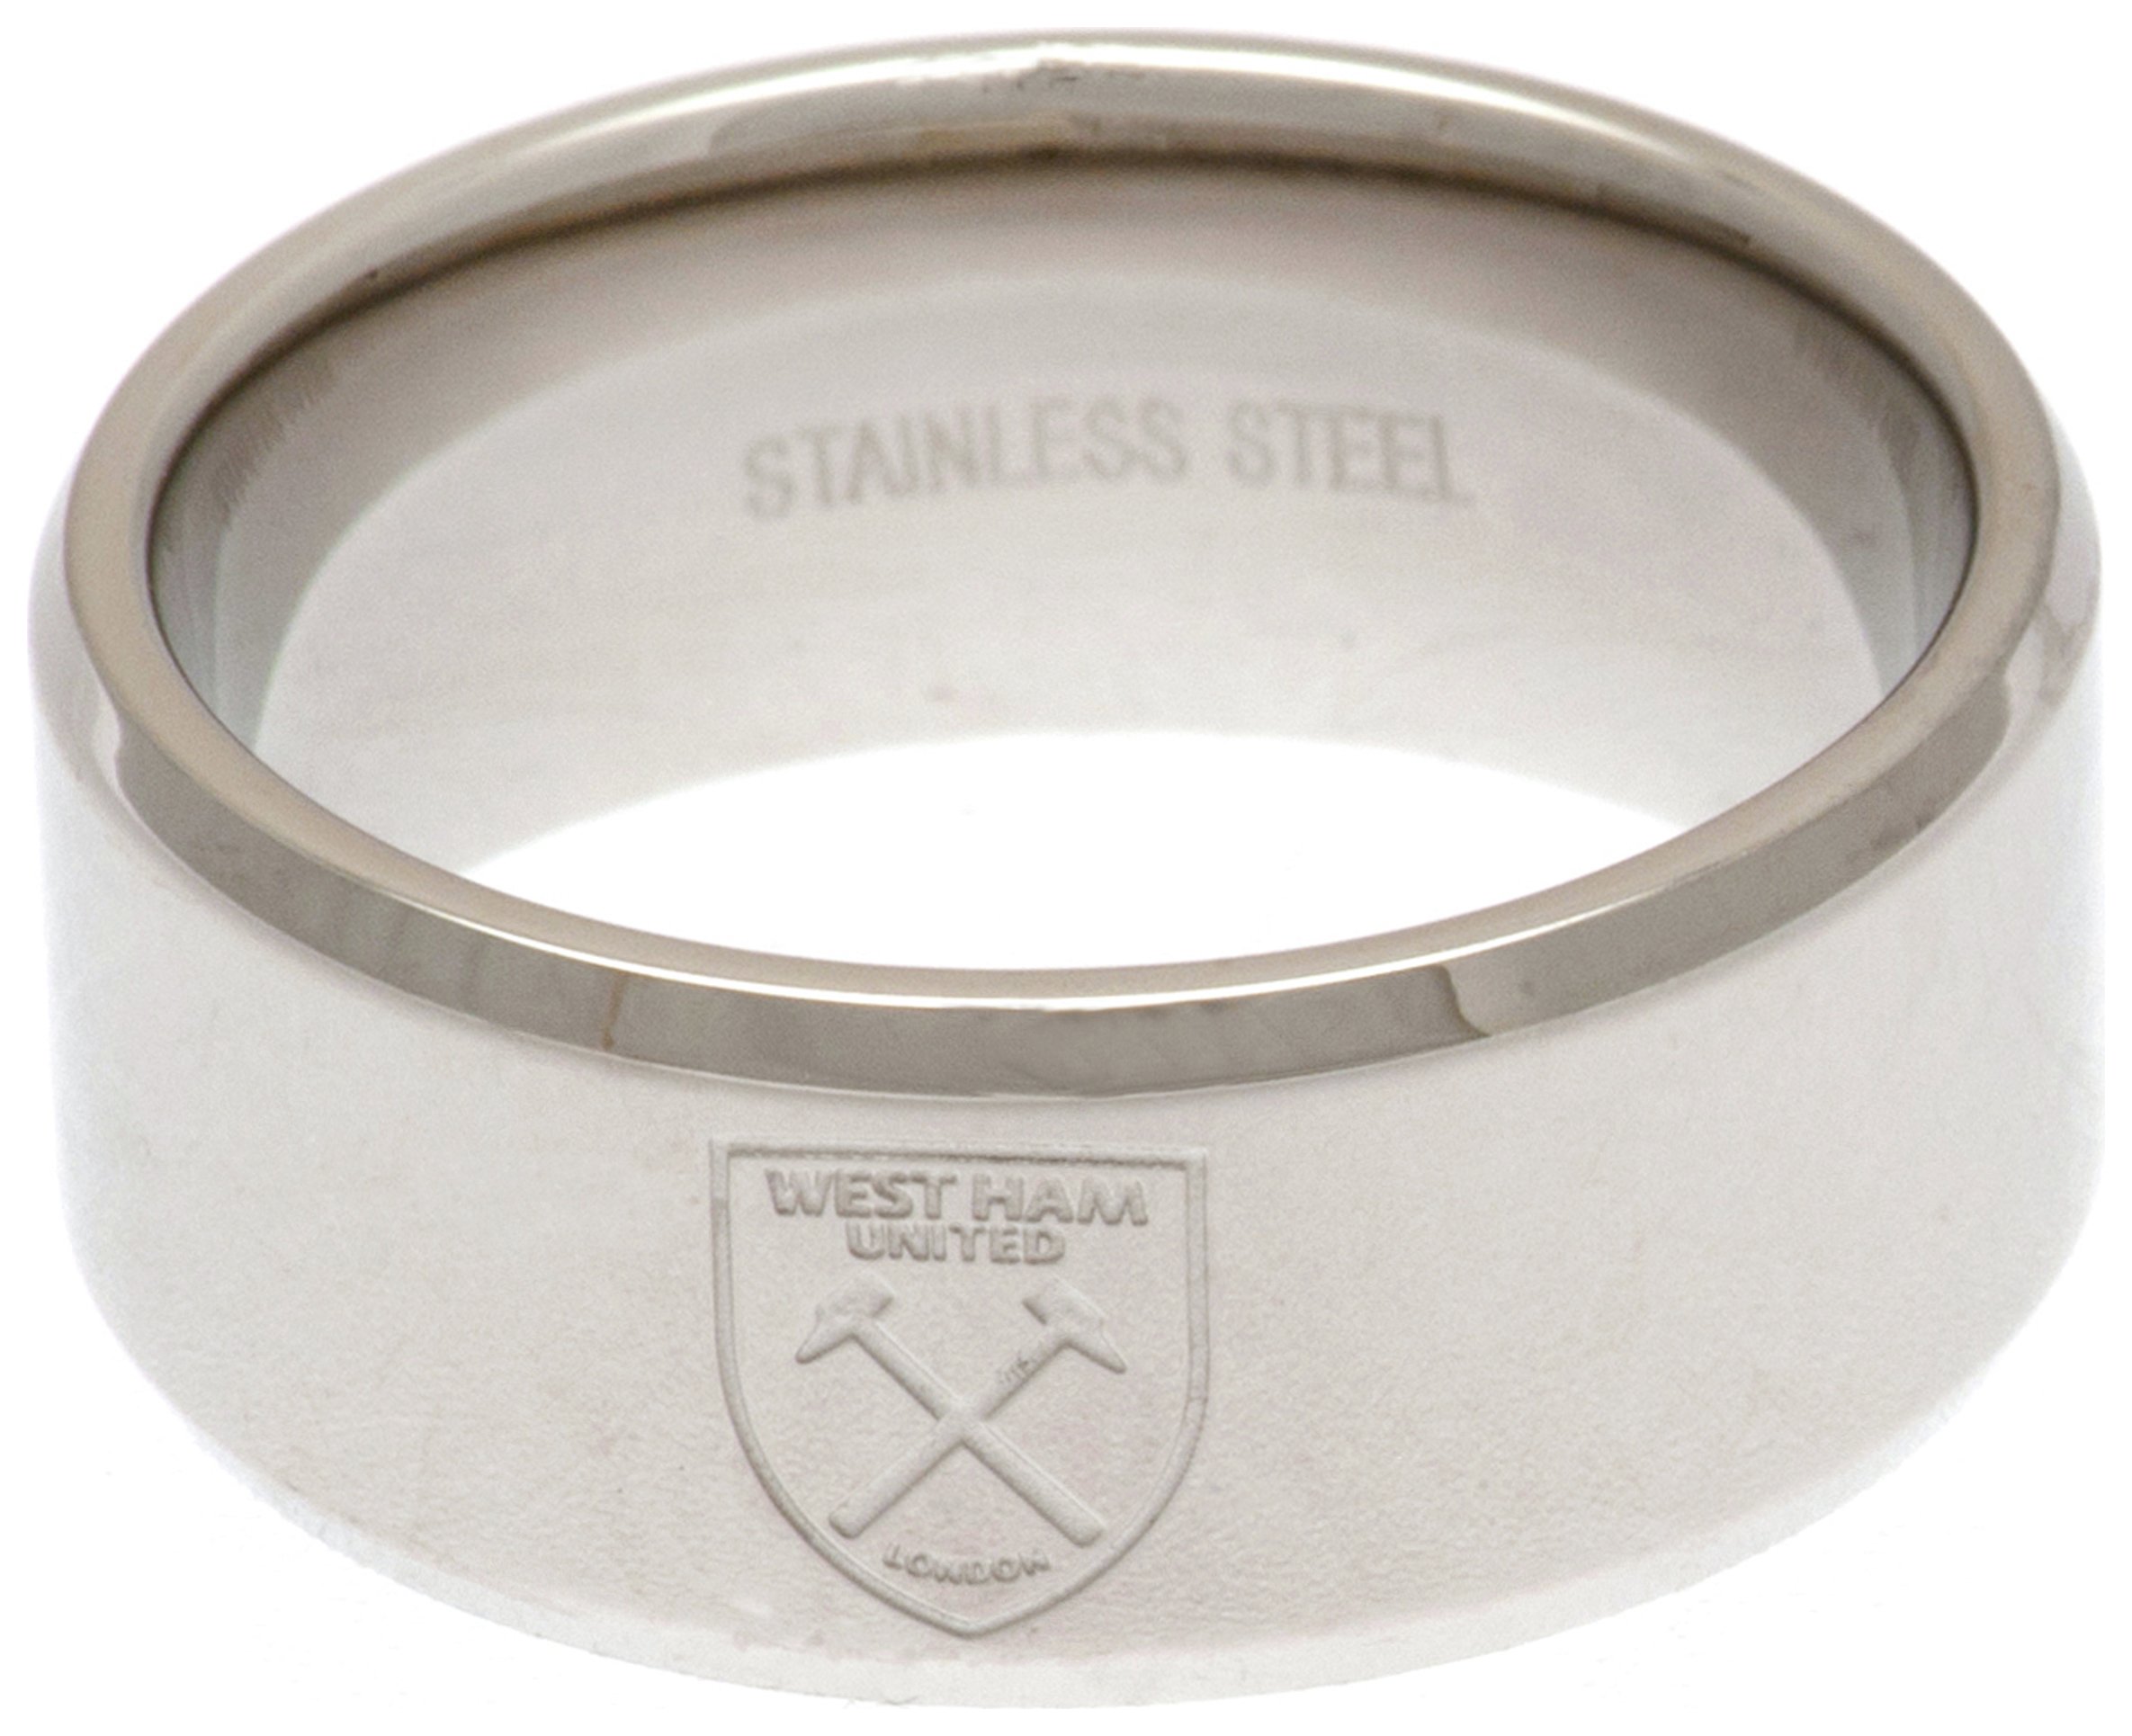 Stainless Steel West Ham Ring - Size U